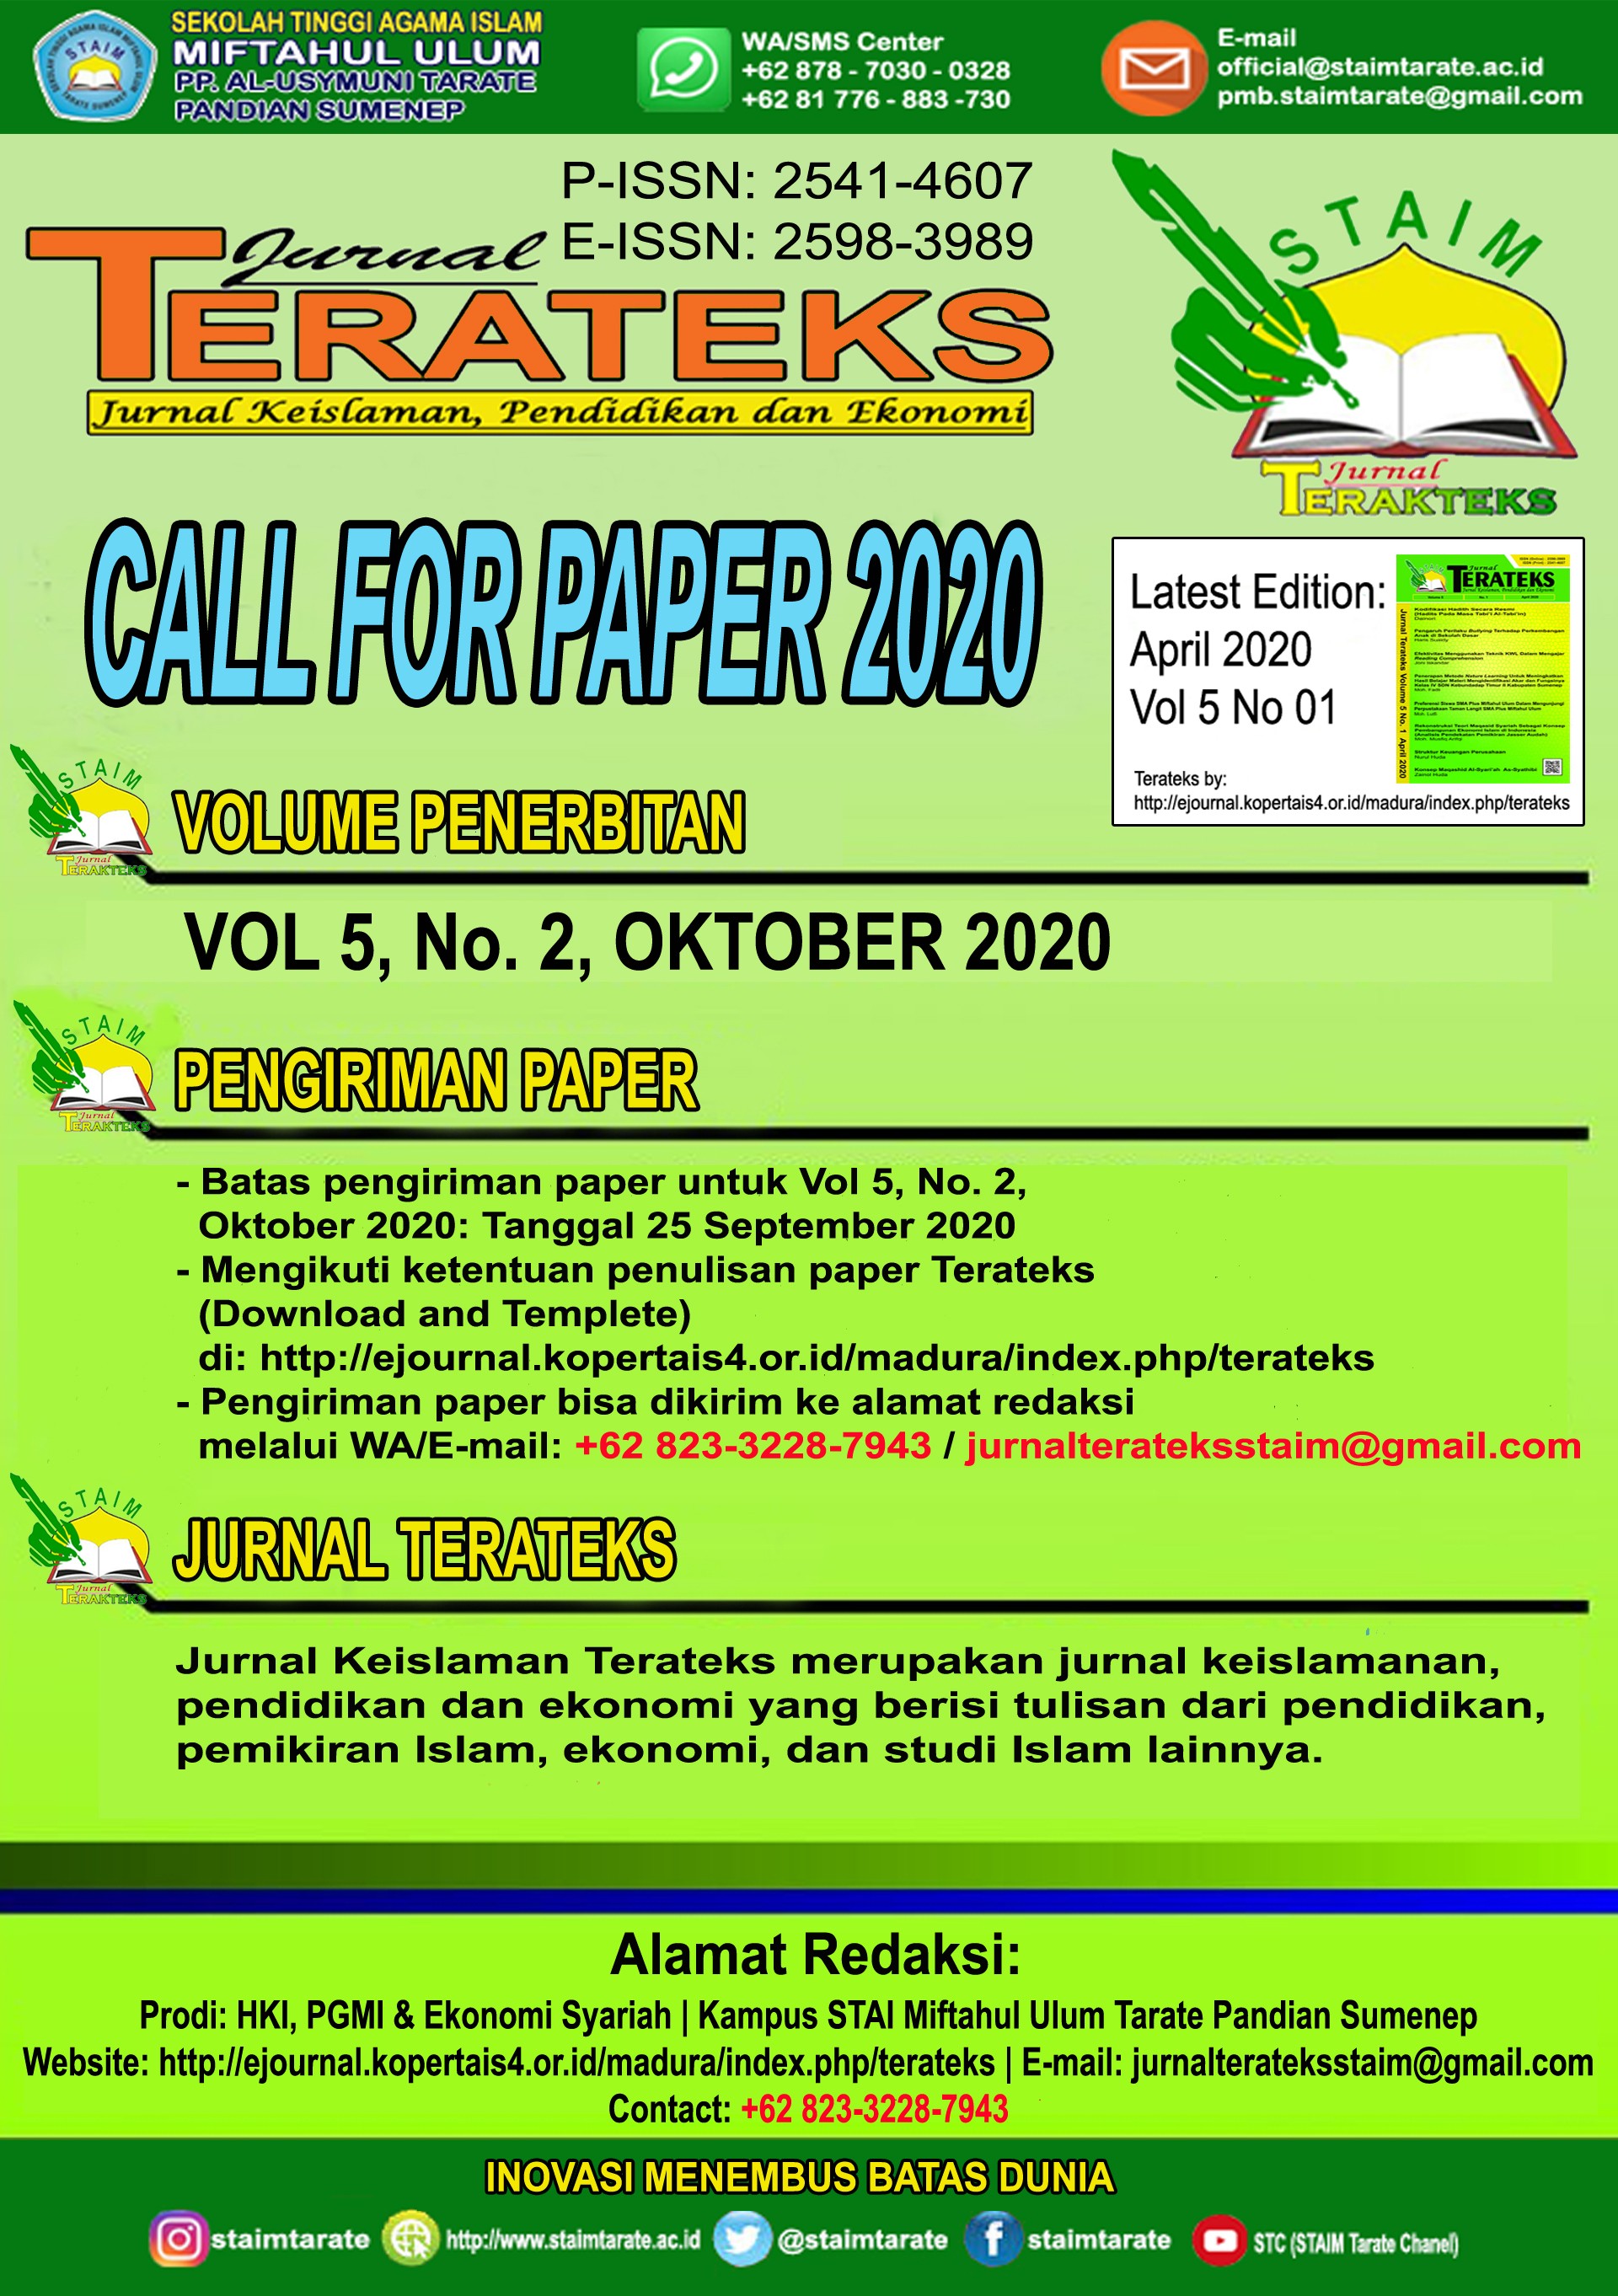 Call For Paper 2020